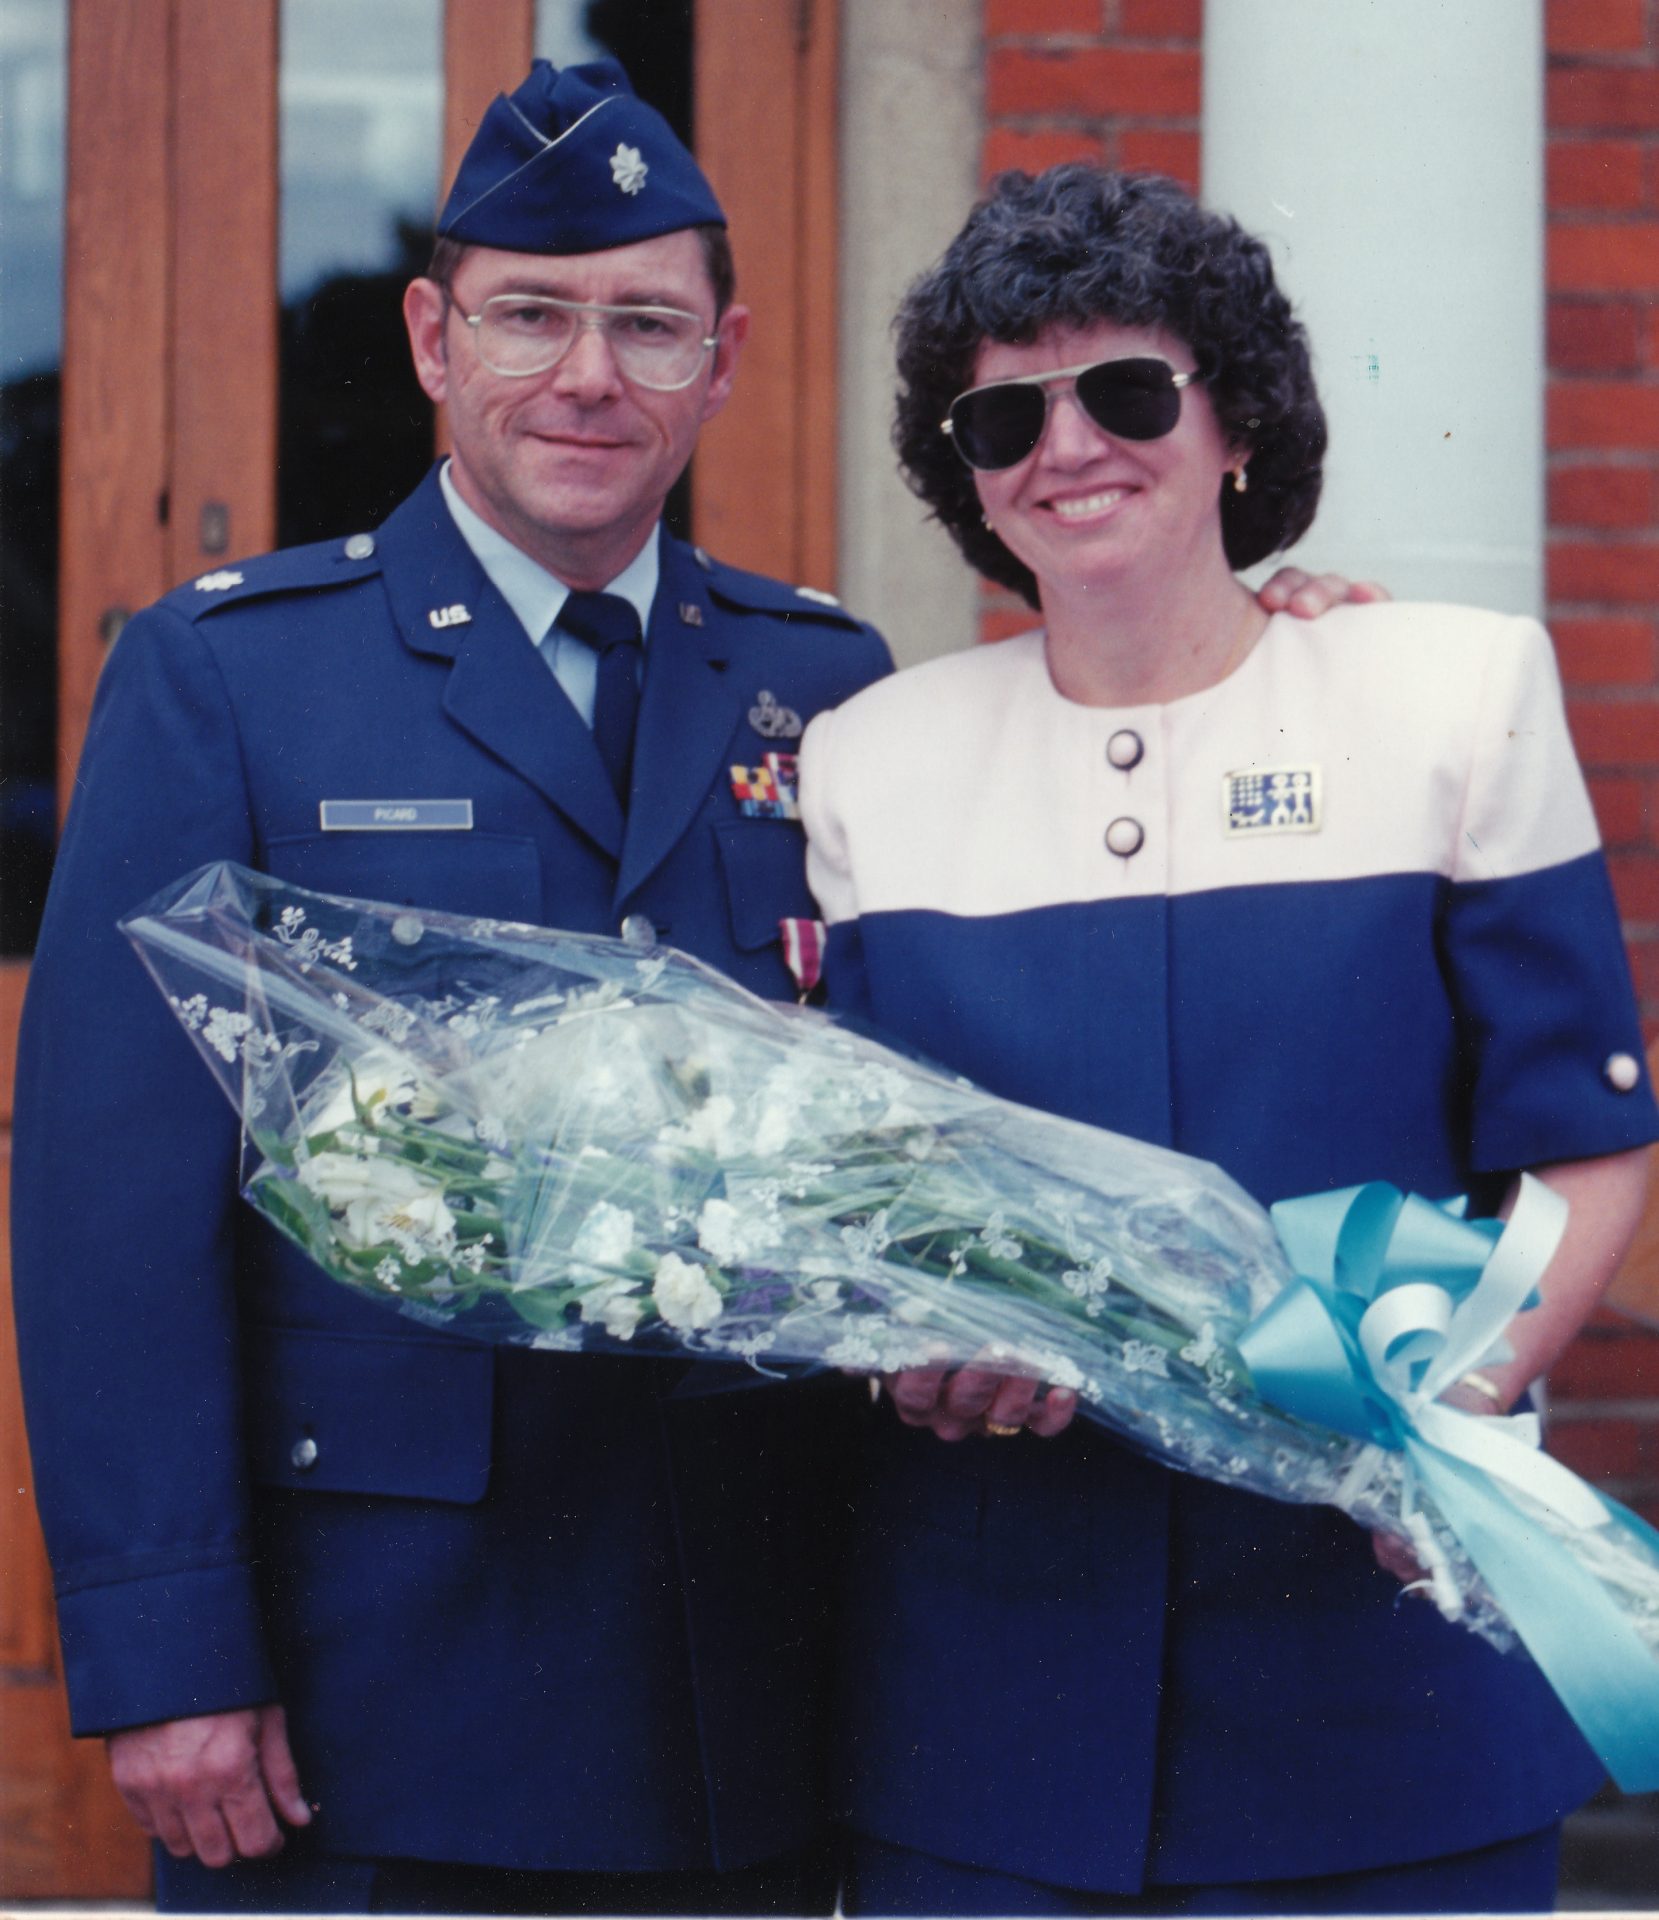 Don on the day he retired from the Air Force